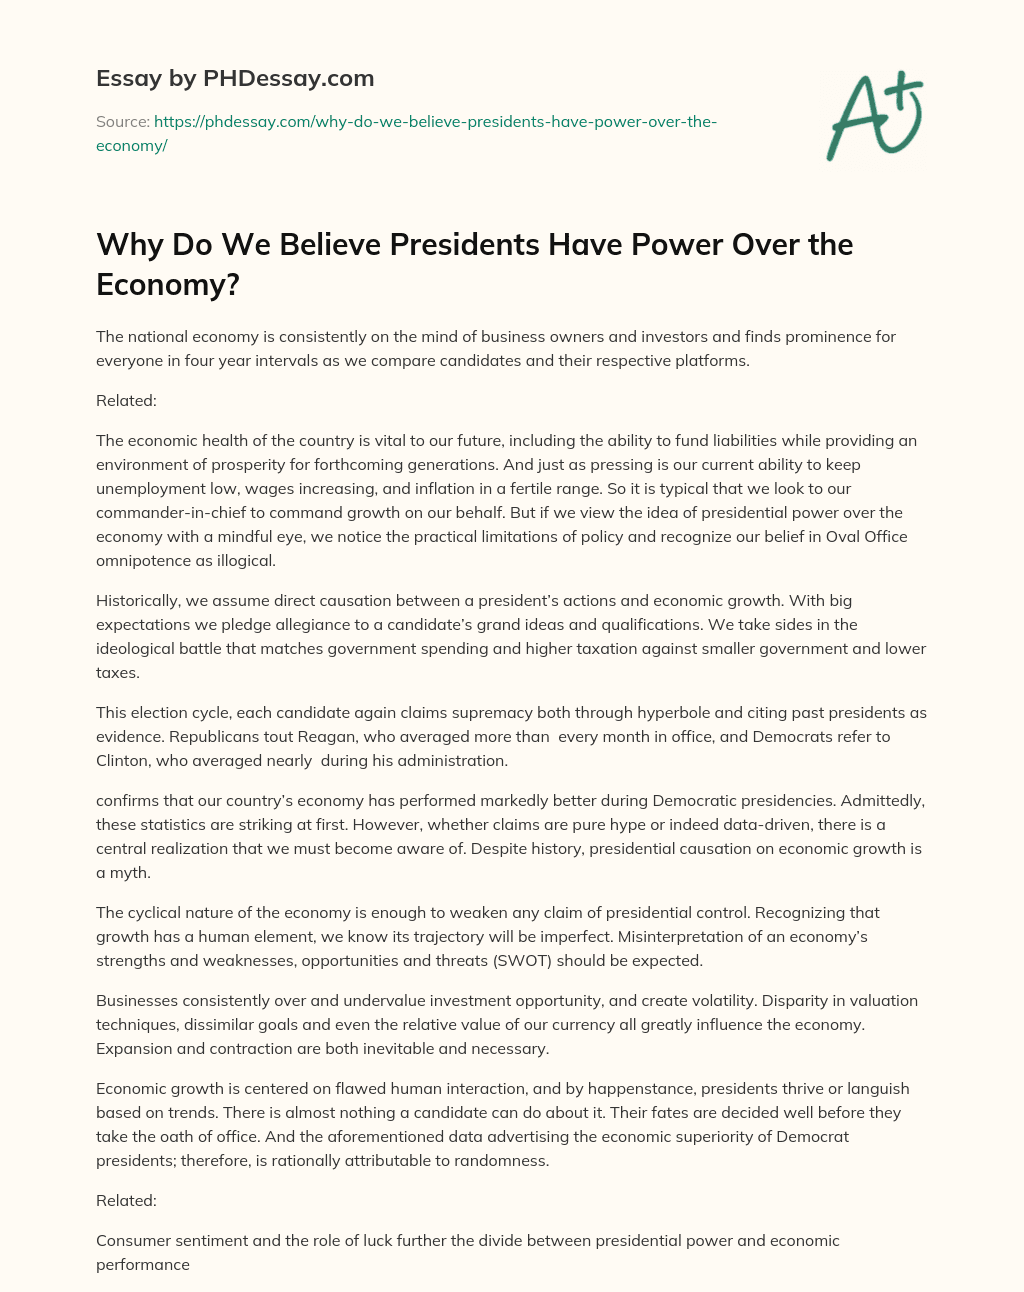 Why Do We Believe Presidents Have Power Over the Economy? essay